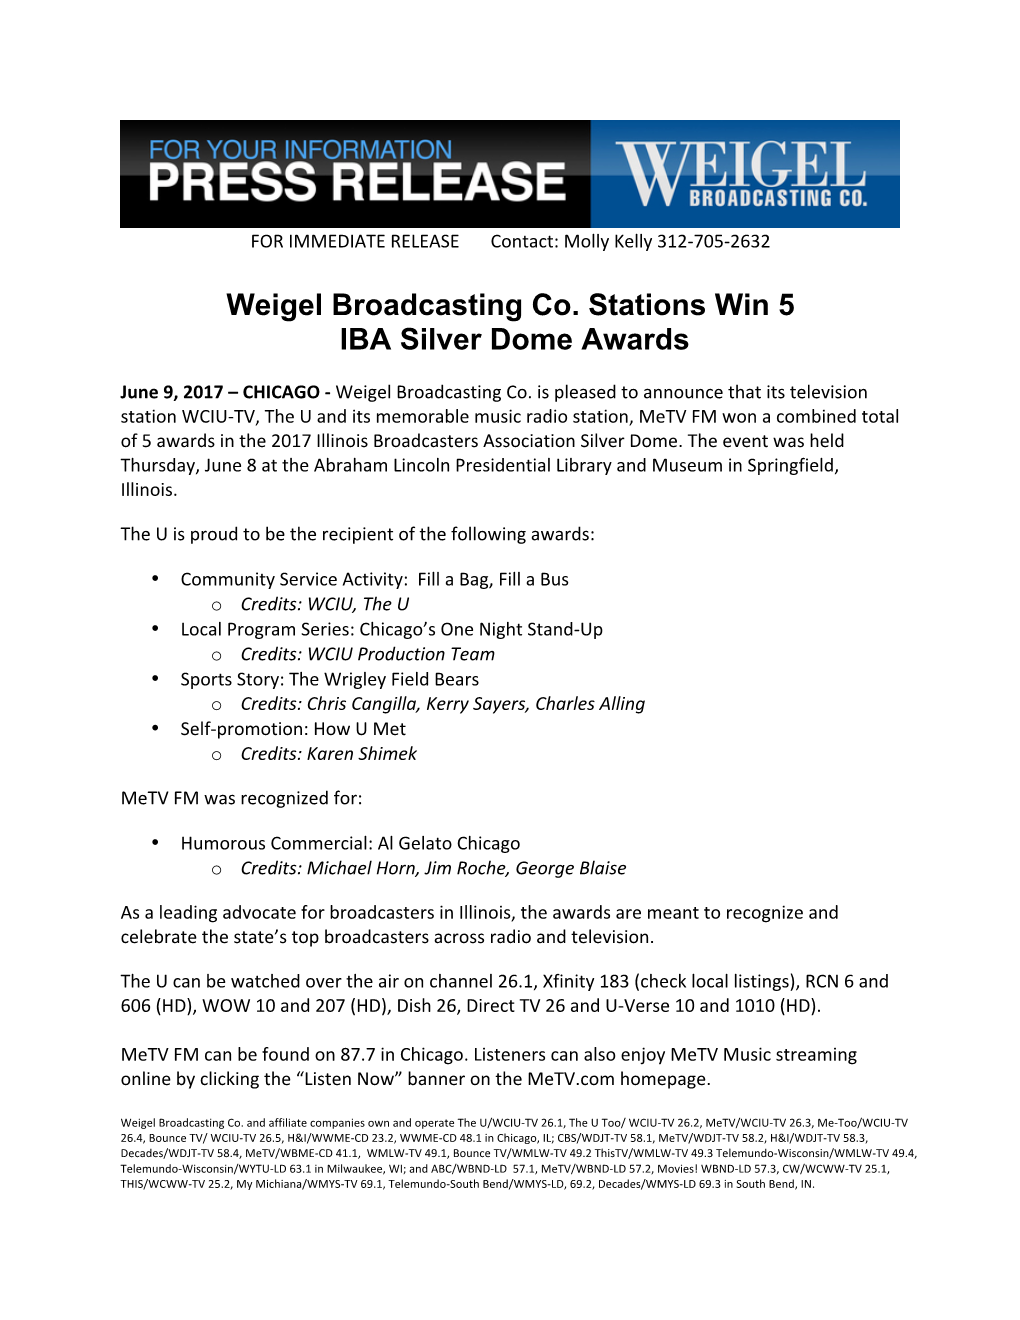 Weigel Broadcasting Co. Stations Win 5 IBA Silver Dome Awards